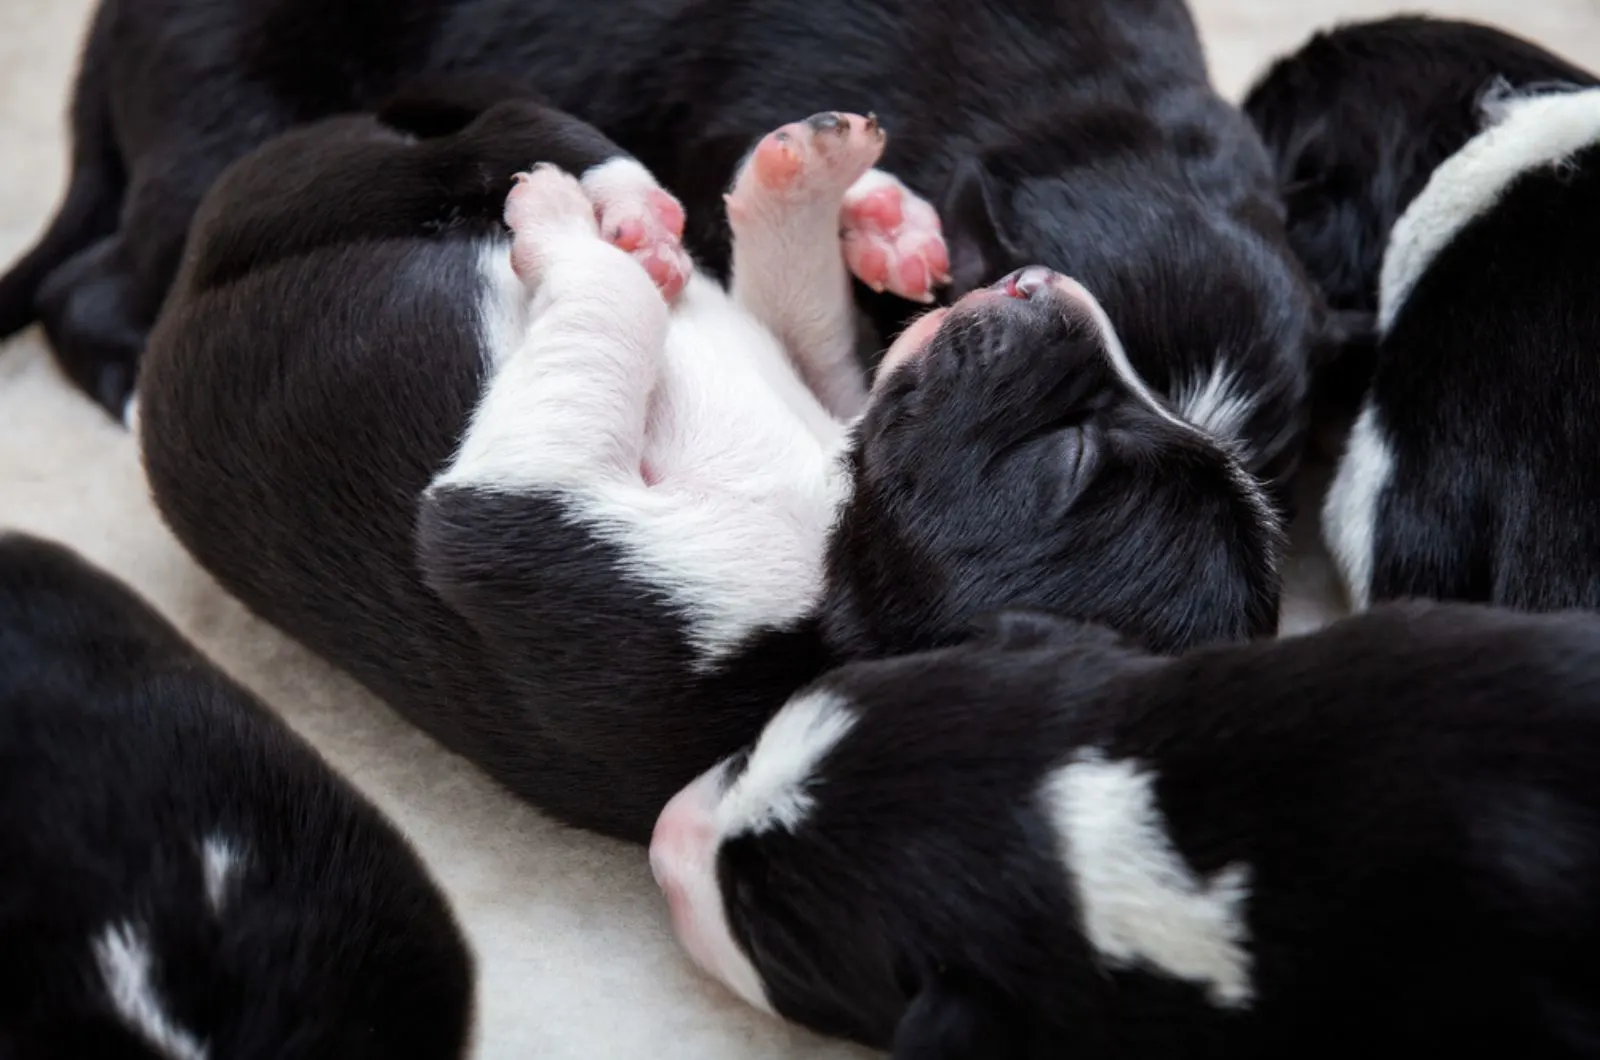 boreder collie puppies sleeping together